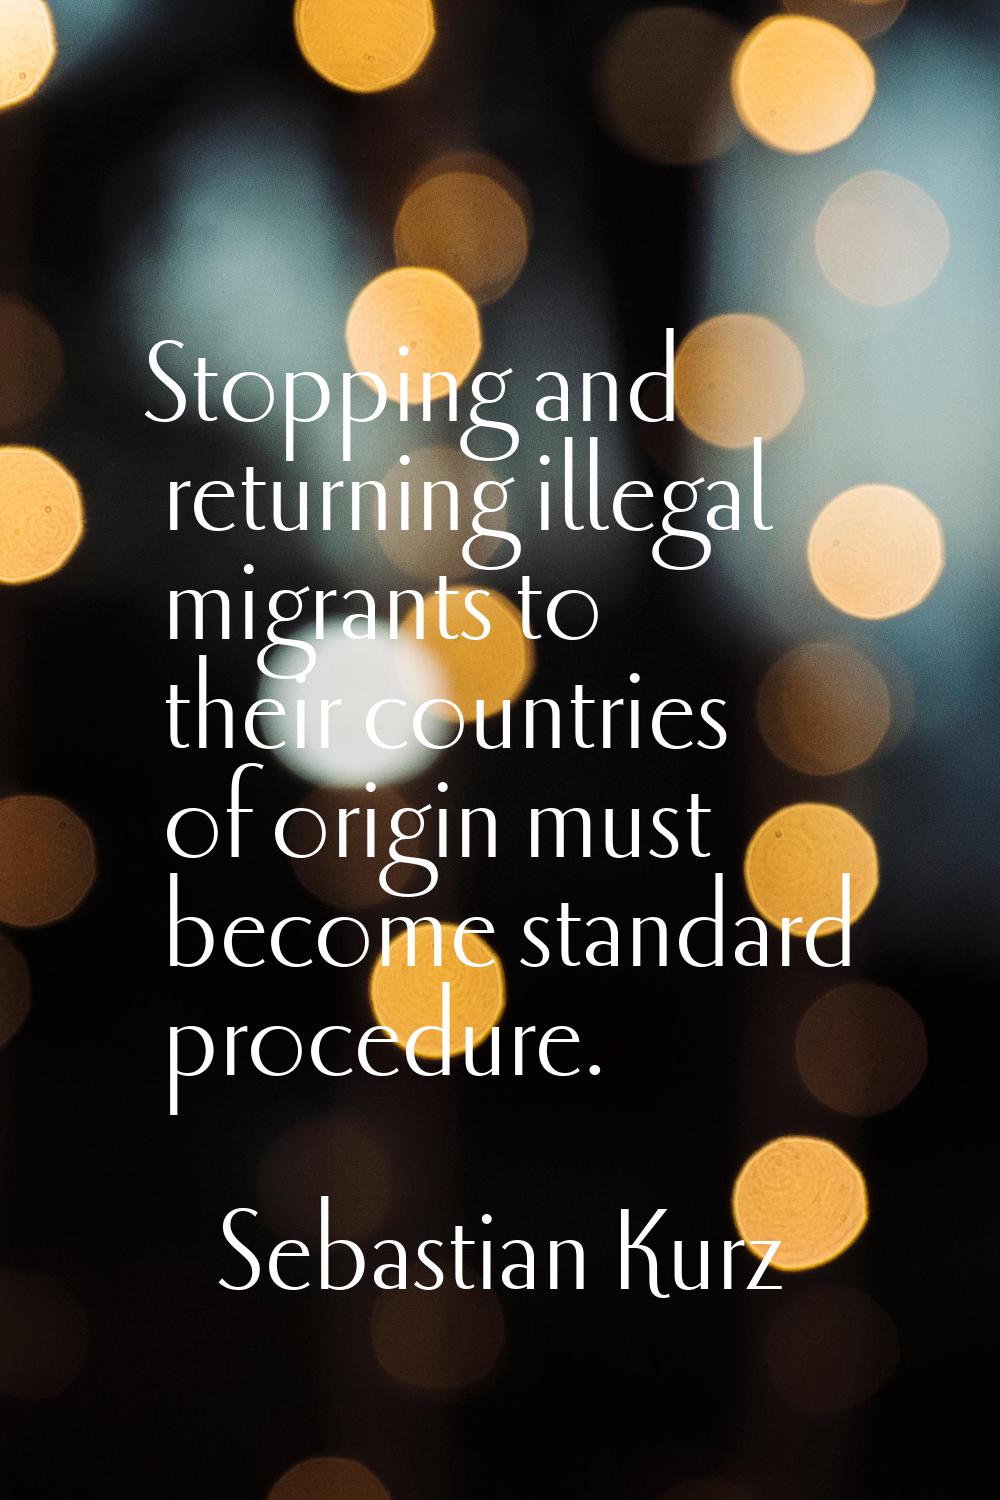 Stopping and returning illegal migrants to their countries of origin must become standard procedure